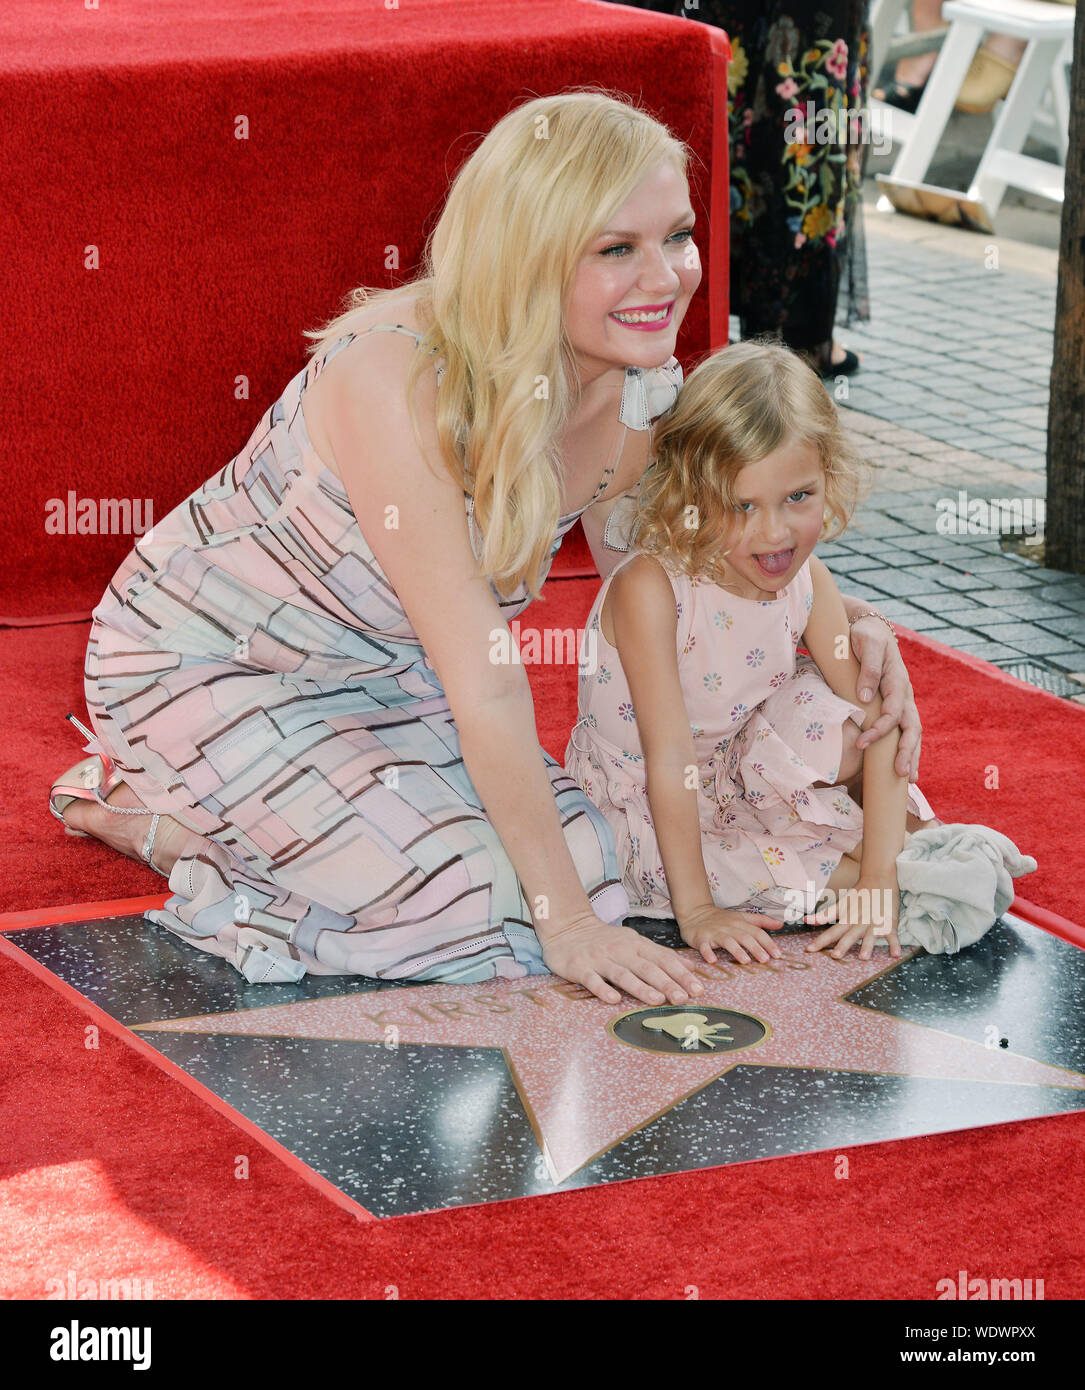 Los Angeles, USA. 29th Aug, 2019. a_Kirsten Dunst 009 and daughter attend as Kirsten Dunst is honored with a Star on the Hollywood Walk of Fame on August 29, 2019 in Hollywood, California. Credit: Tsuni/USA/Alamy Live News Stock Photo